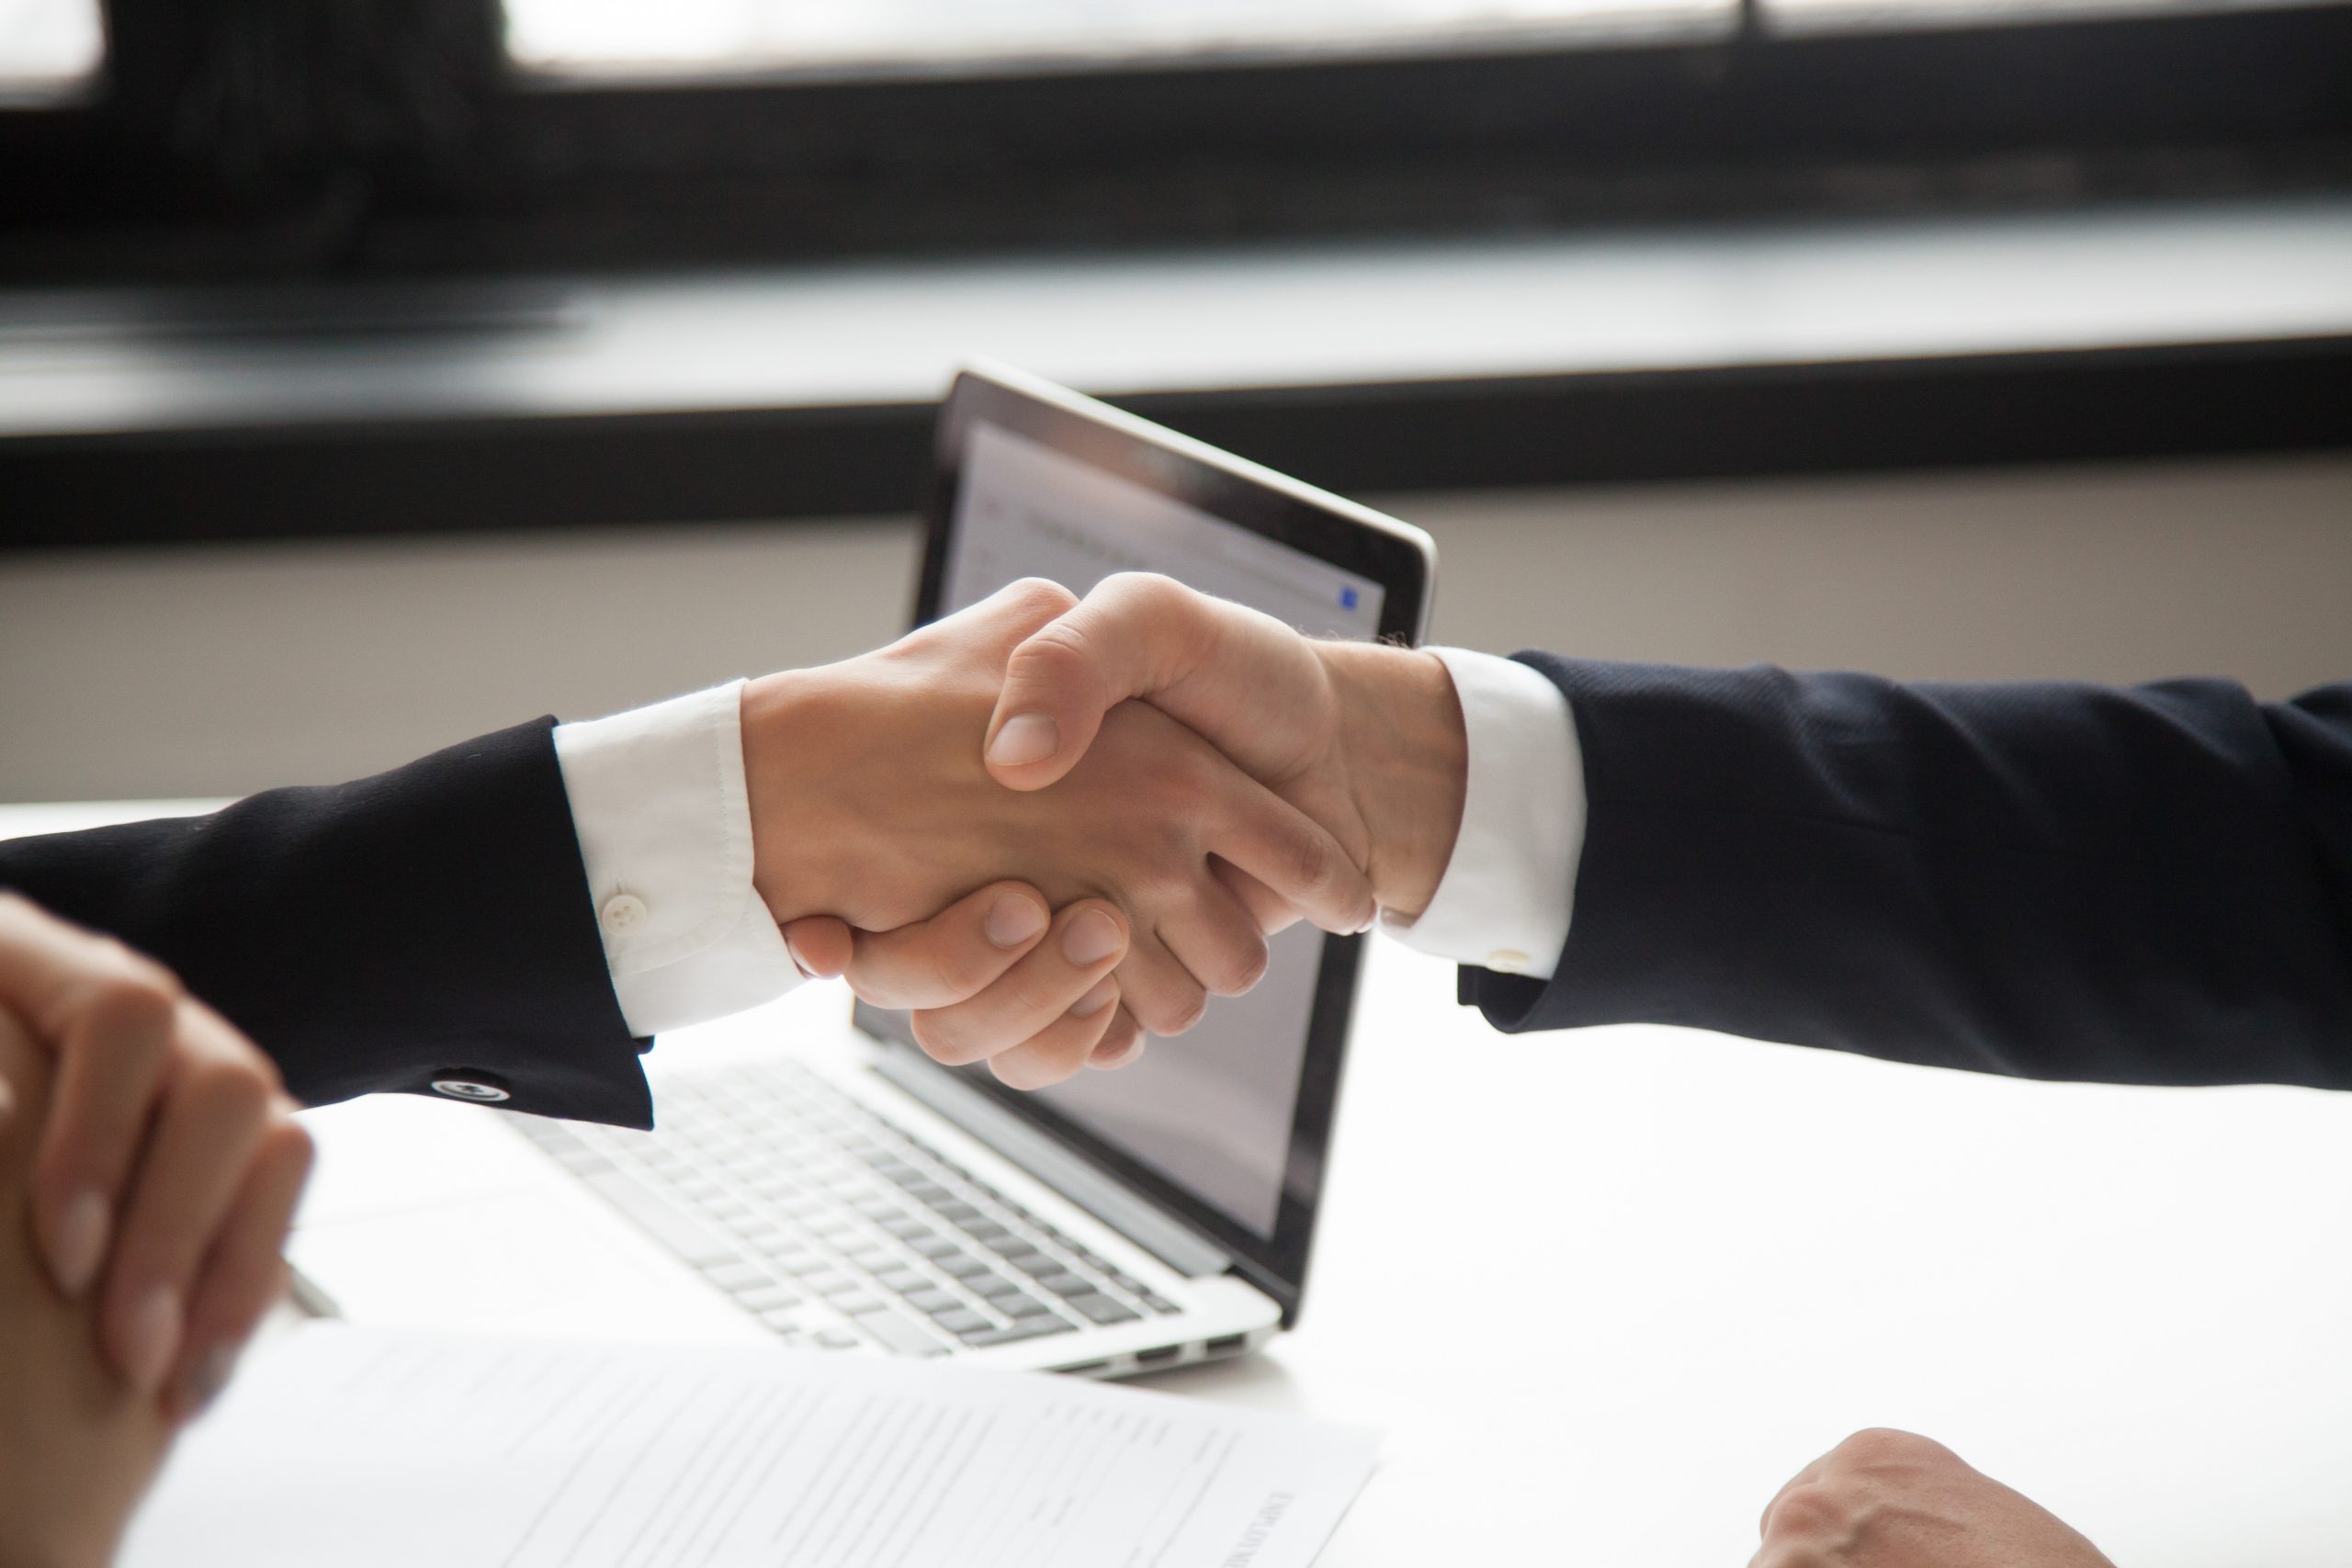 businessman handshaking businesswoman showing respect closeup view hands shaking scaled